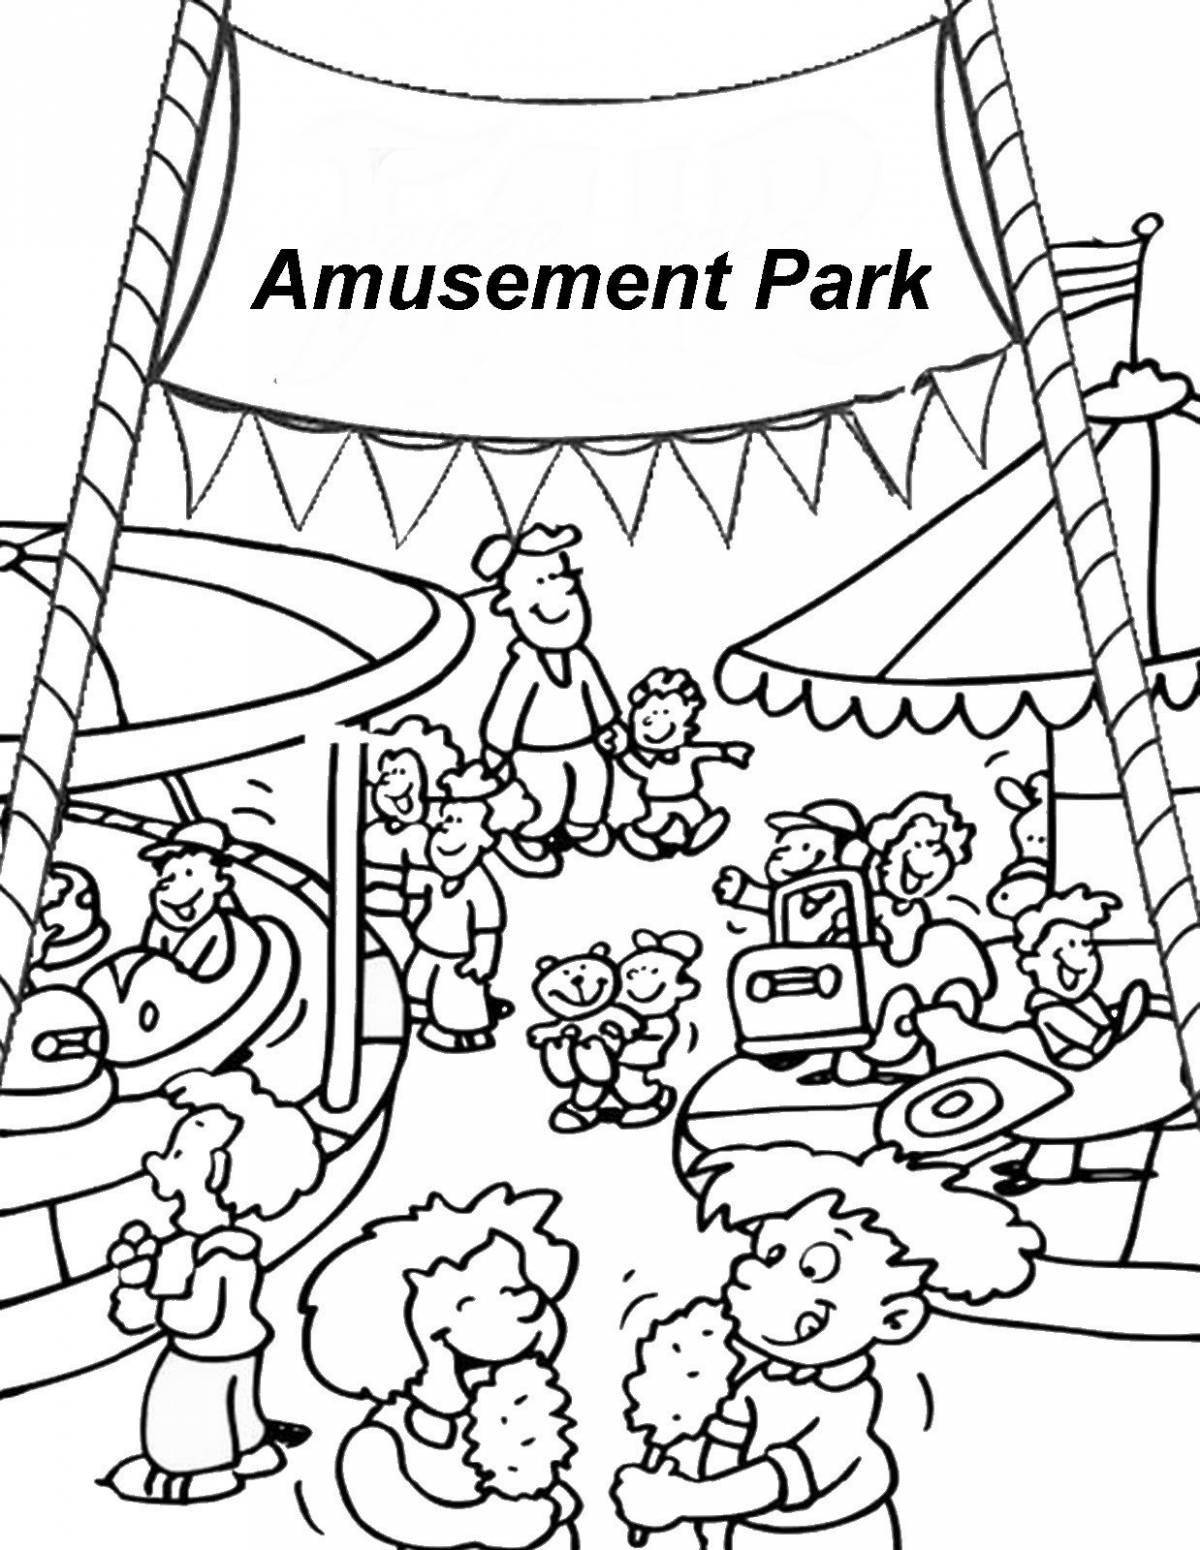 Playful park coloring page